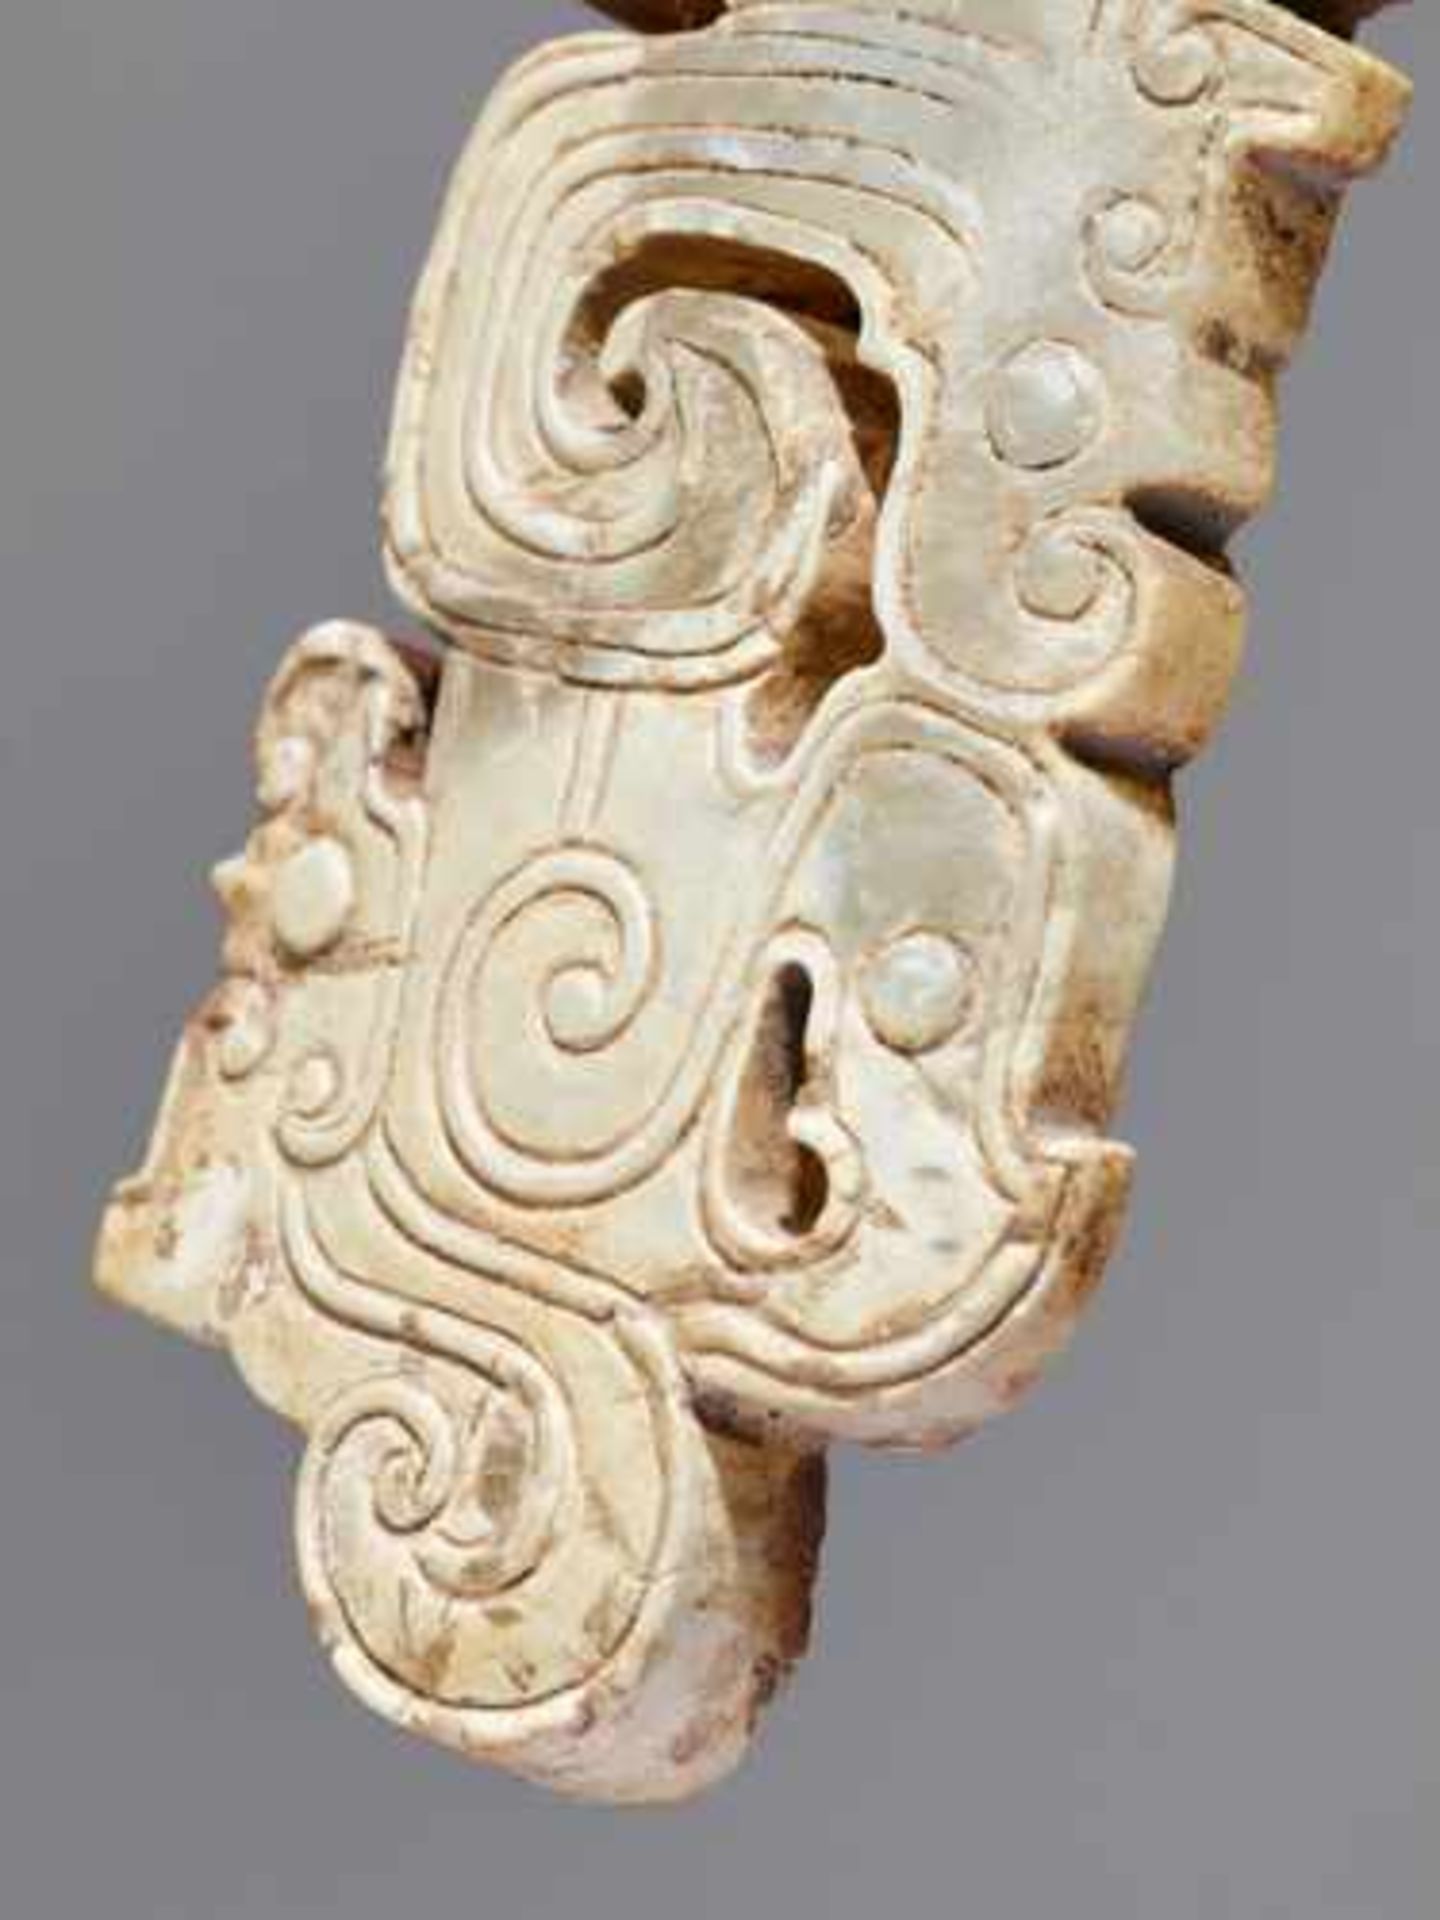 A SCULPTURAL ORNAMENT WITH A COMPOSITE MOTIF OF HUMAN HEADS AND DRAGONS Jade, China. Western Zhou, - Image 5 of 10